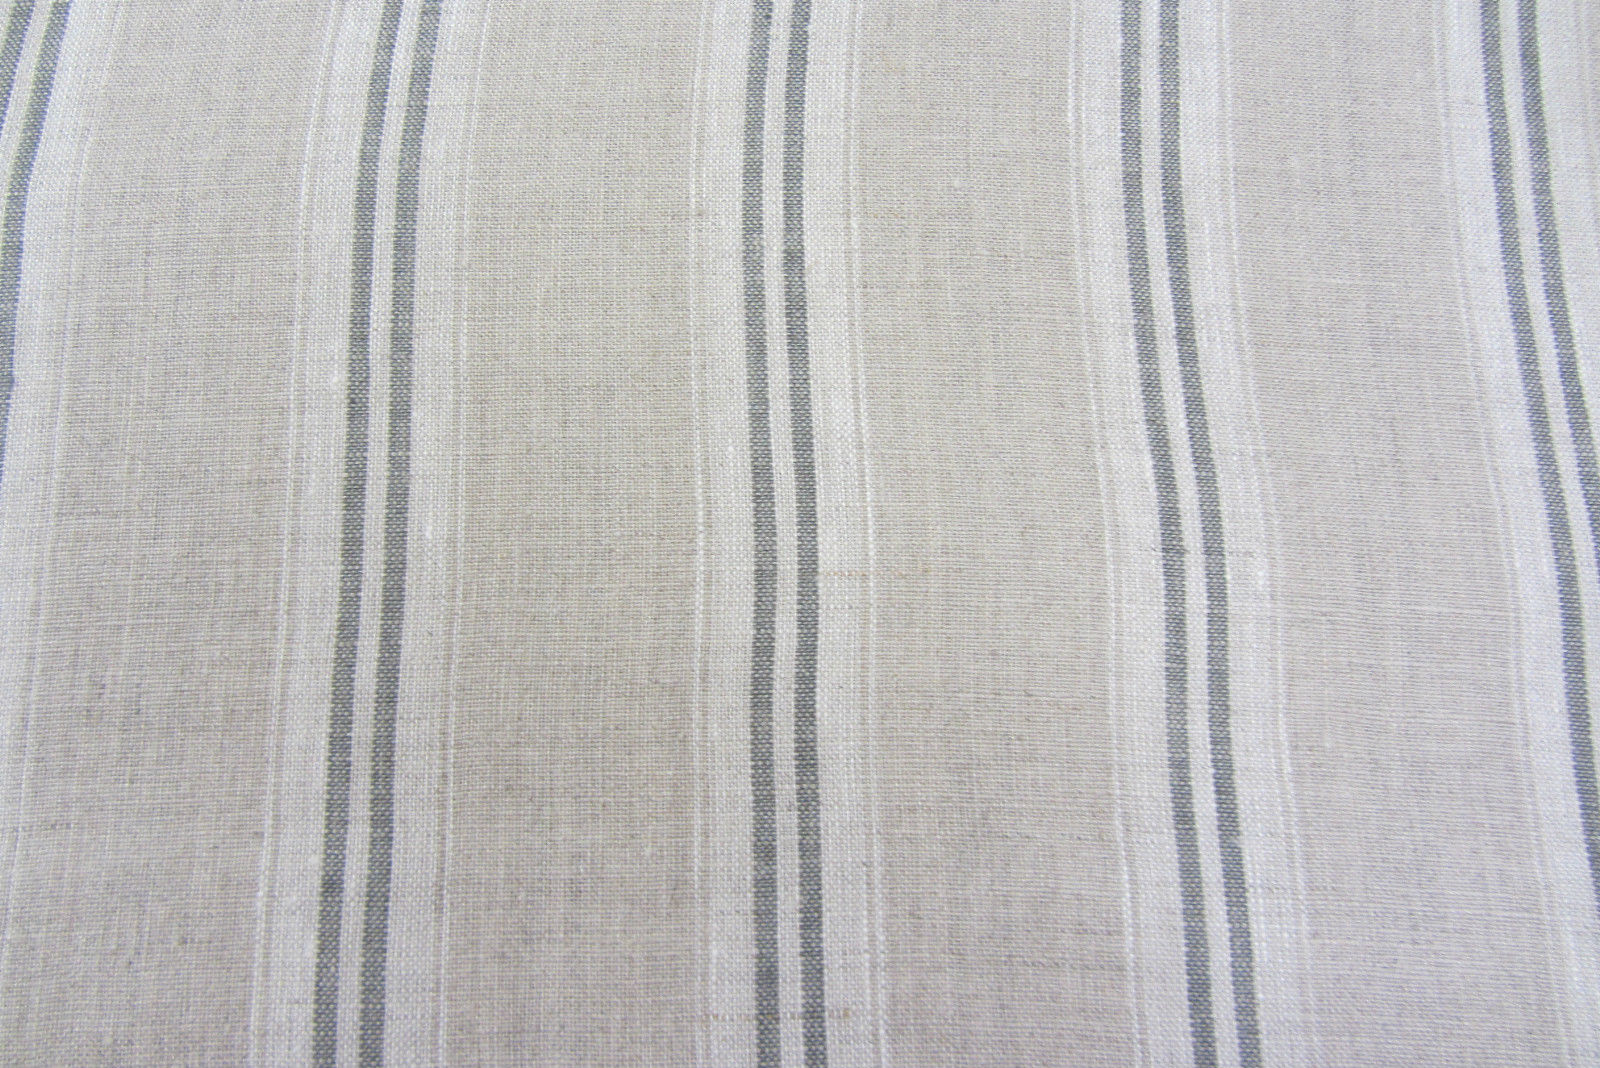  French Vintage Linen Stripe Charcoal Grey Curtain/Craft / upholstery Fabric 